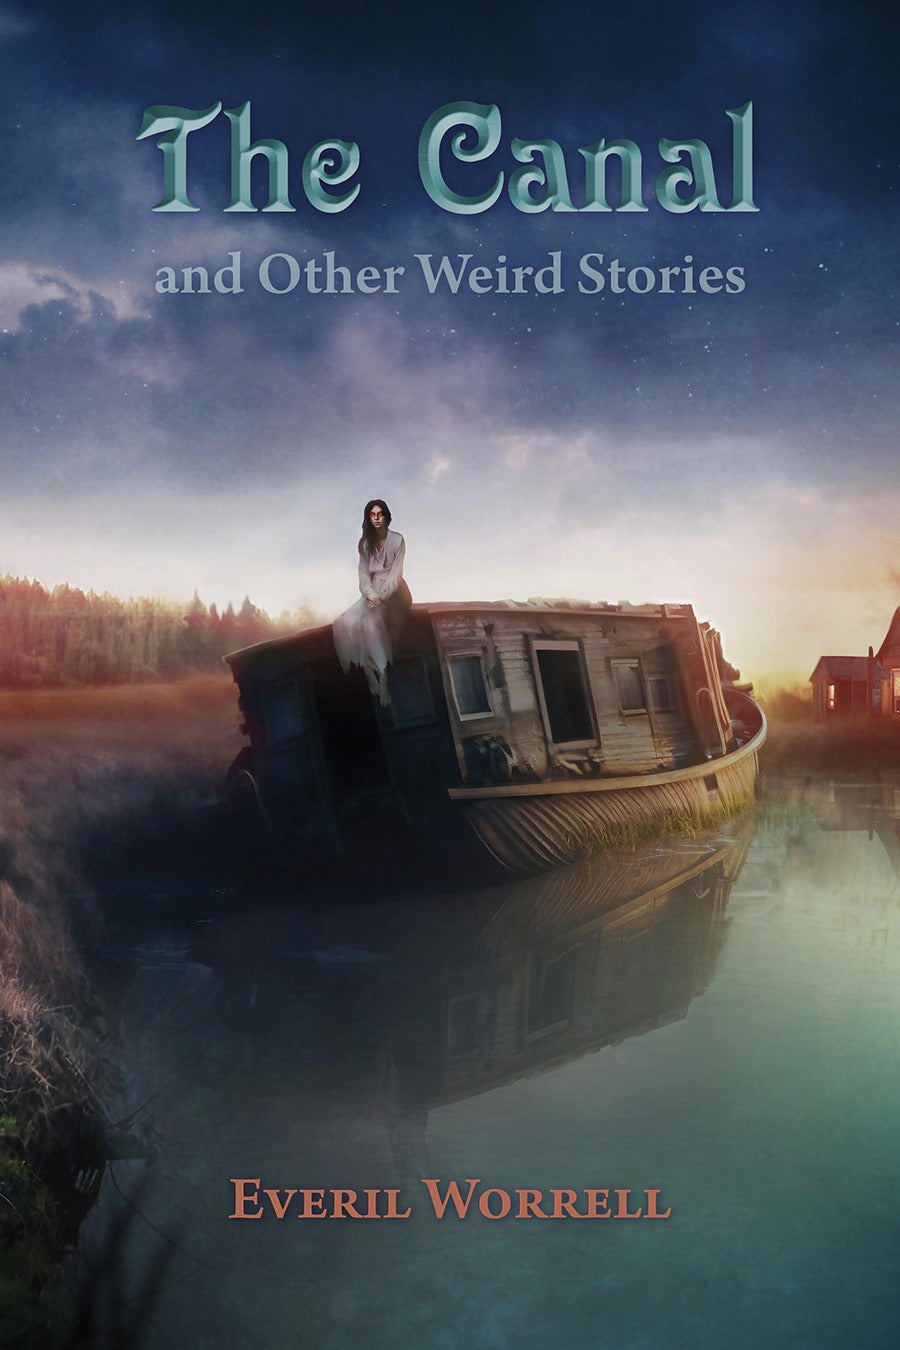 The Canal and Other Weird Stories by Everil Worrell Trade Paperback